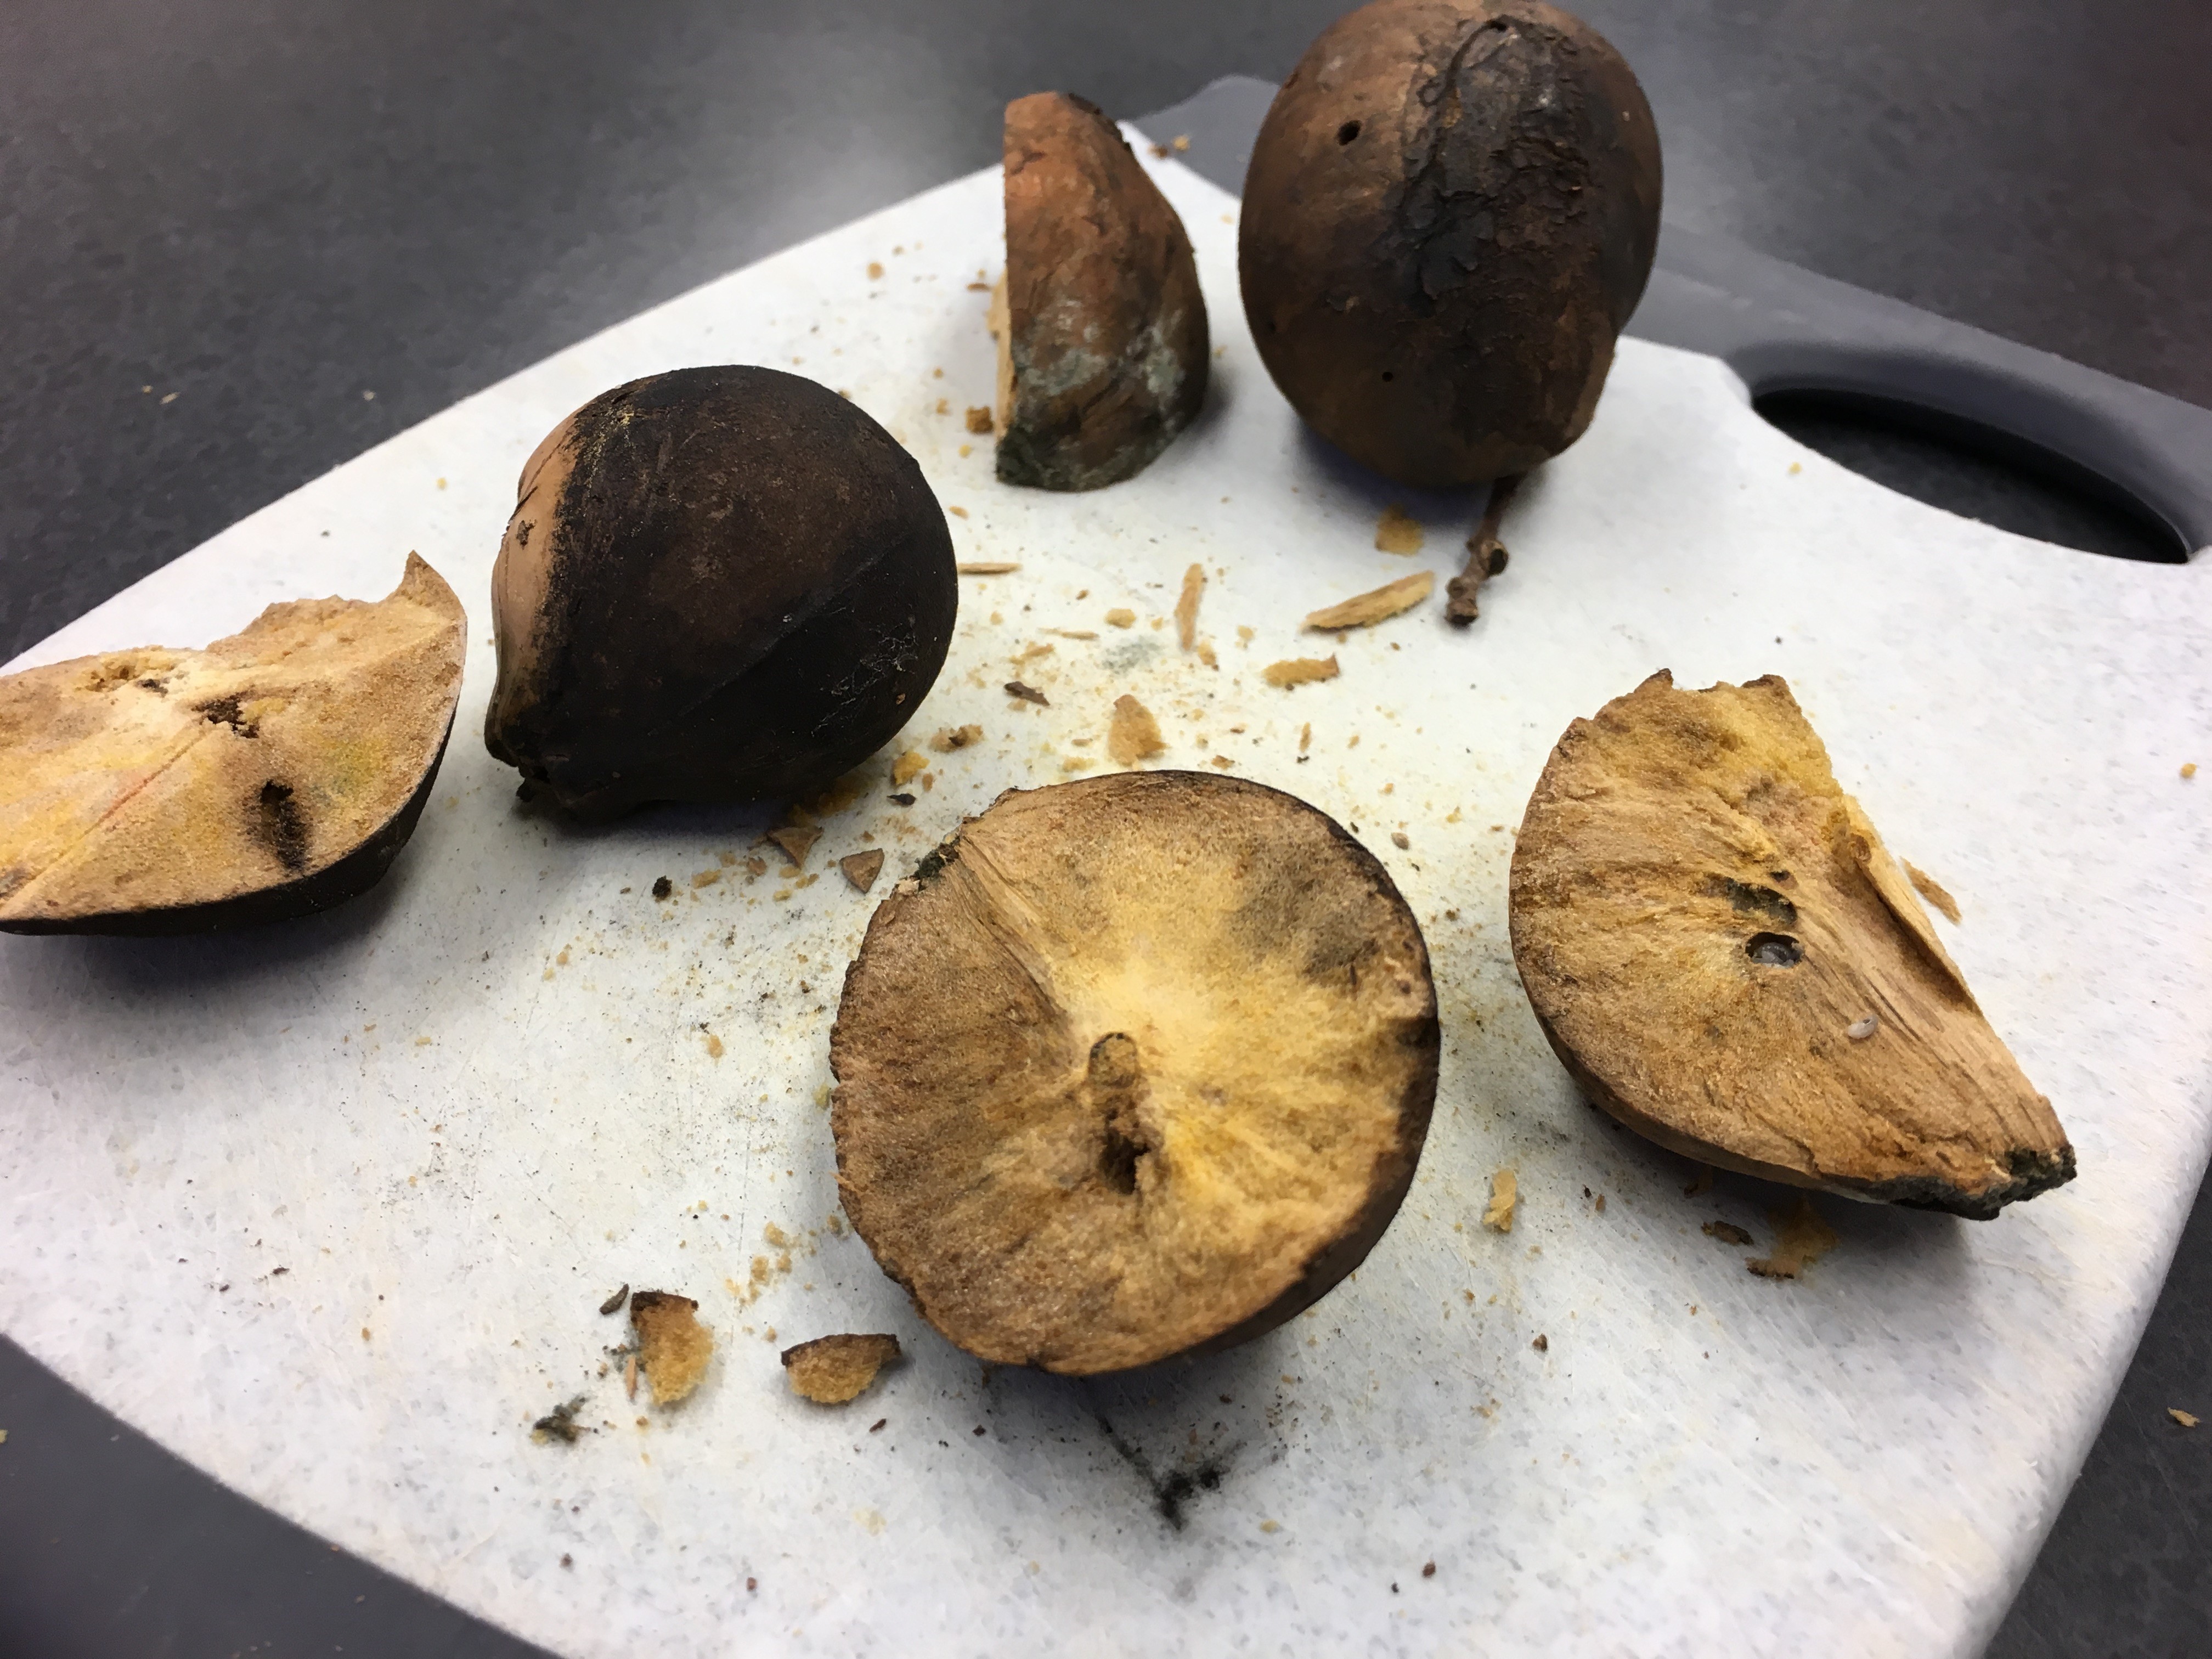 Sliced open "oak apples" reveal how the growths act is incubators for wasp larvae. They're later used by spiders as habitats, providing protection from predators and the elements. Greg Watry/UC Davis 